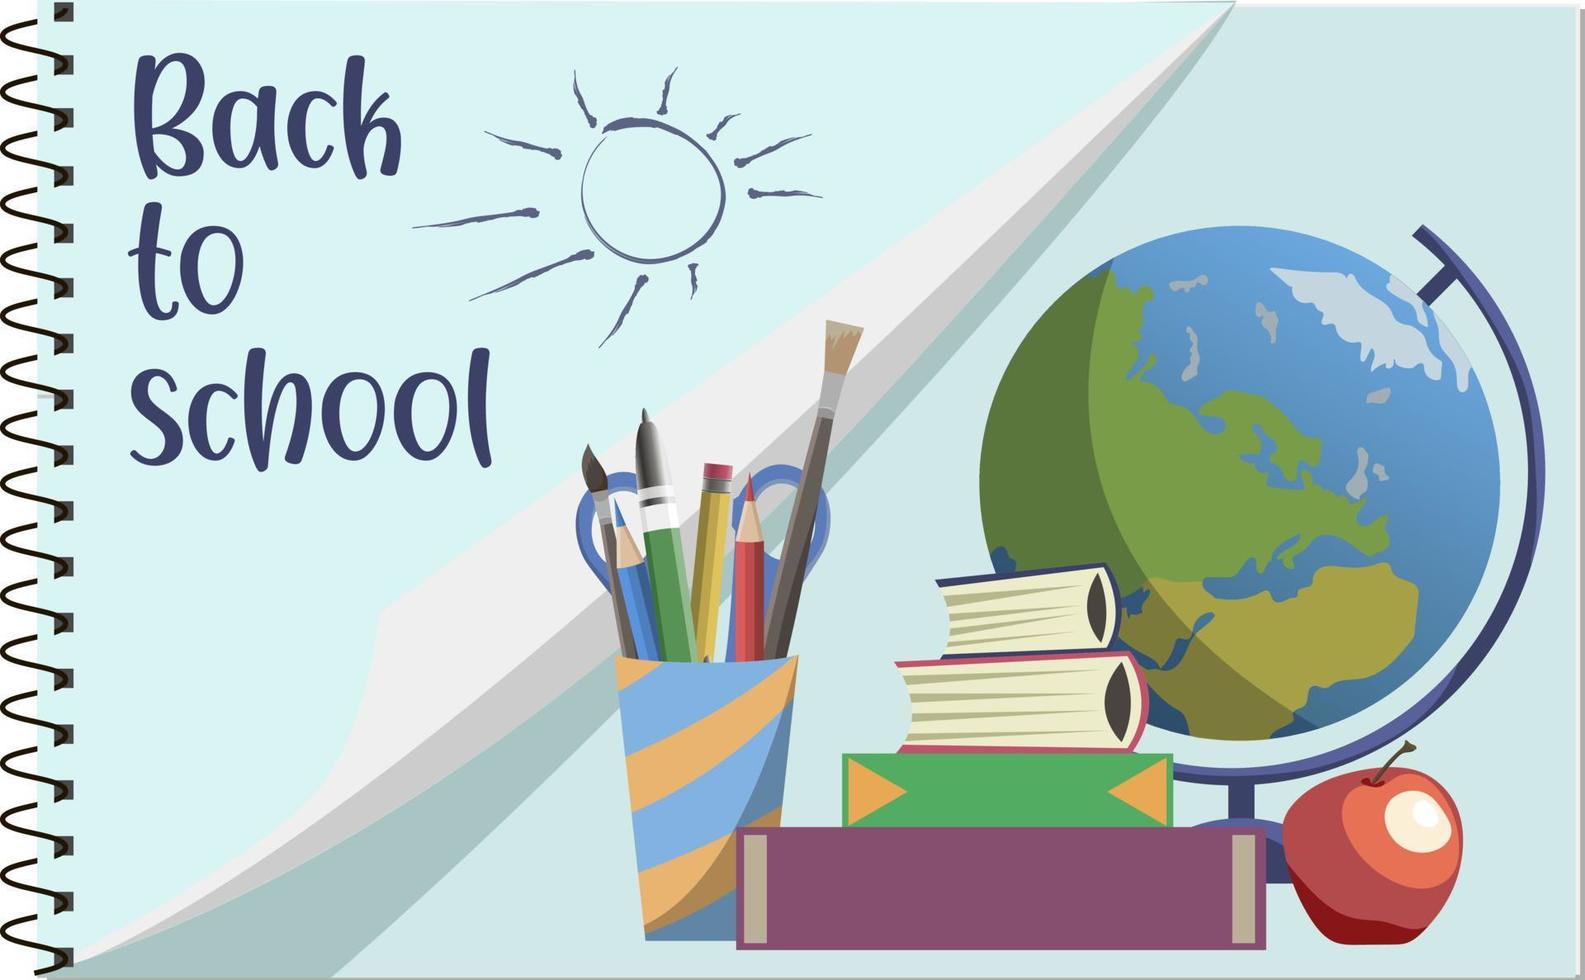 Back to school background with globe, books and school supplies vector